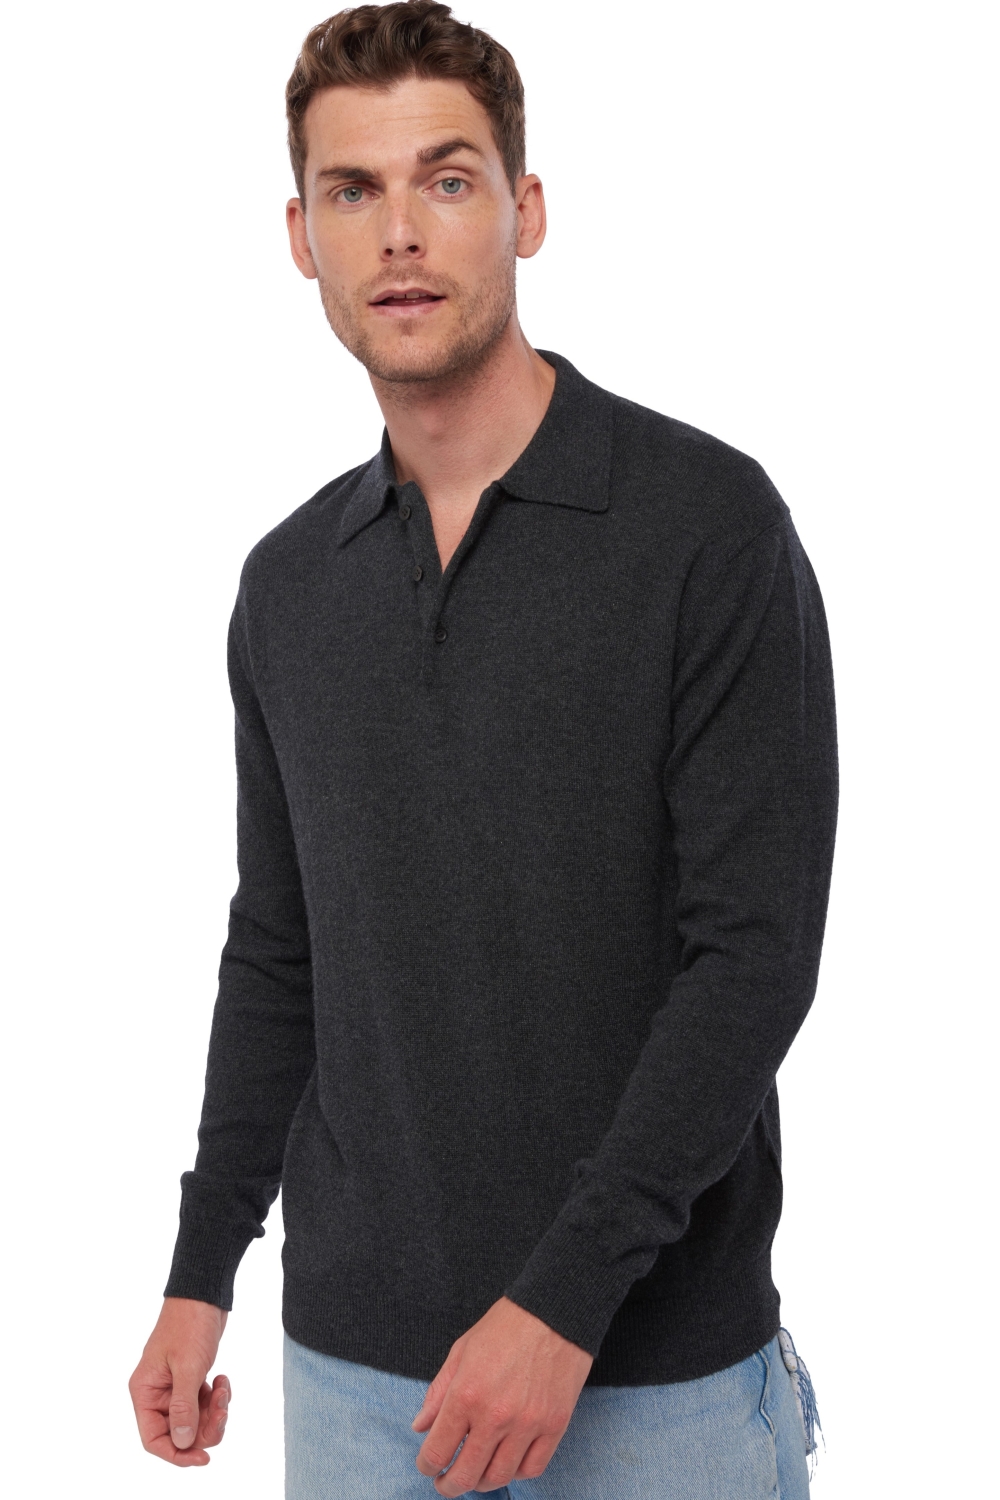 Cashmere men polo style sweaters alexandre charcoal marl 2xl